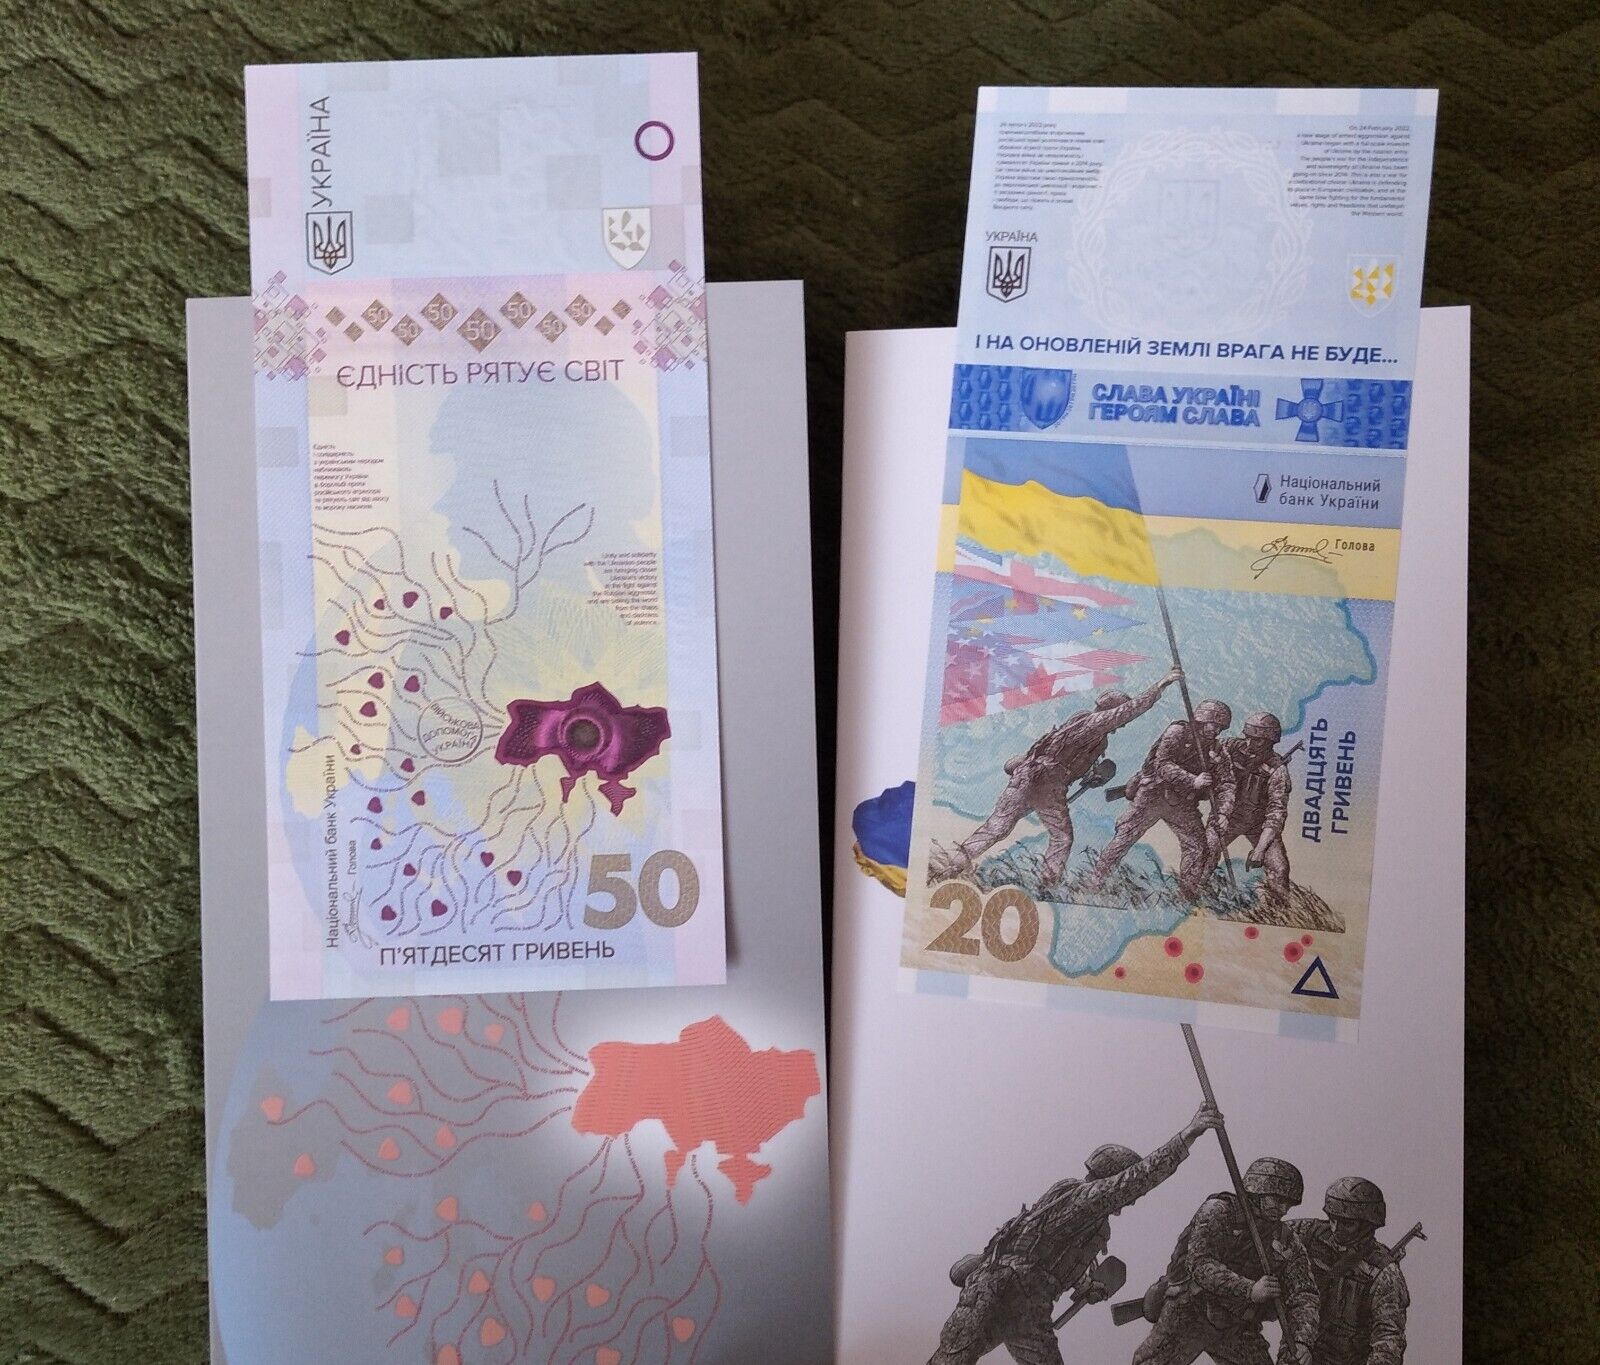 New 50 UAH Ukraine Banknote UNITY SAVES THE WORLD+20 UAH REMEMBER WE WILL .....